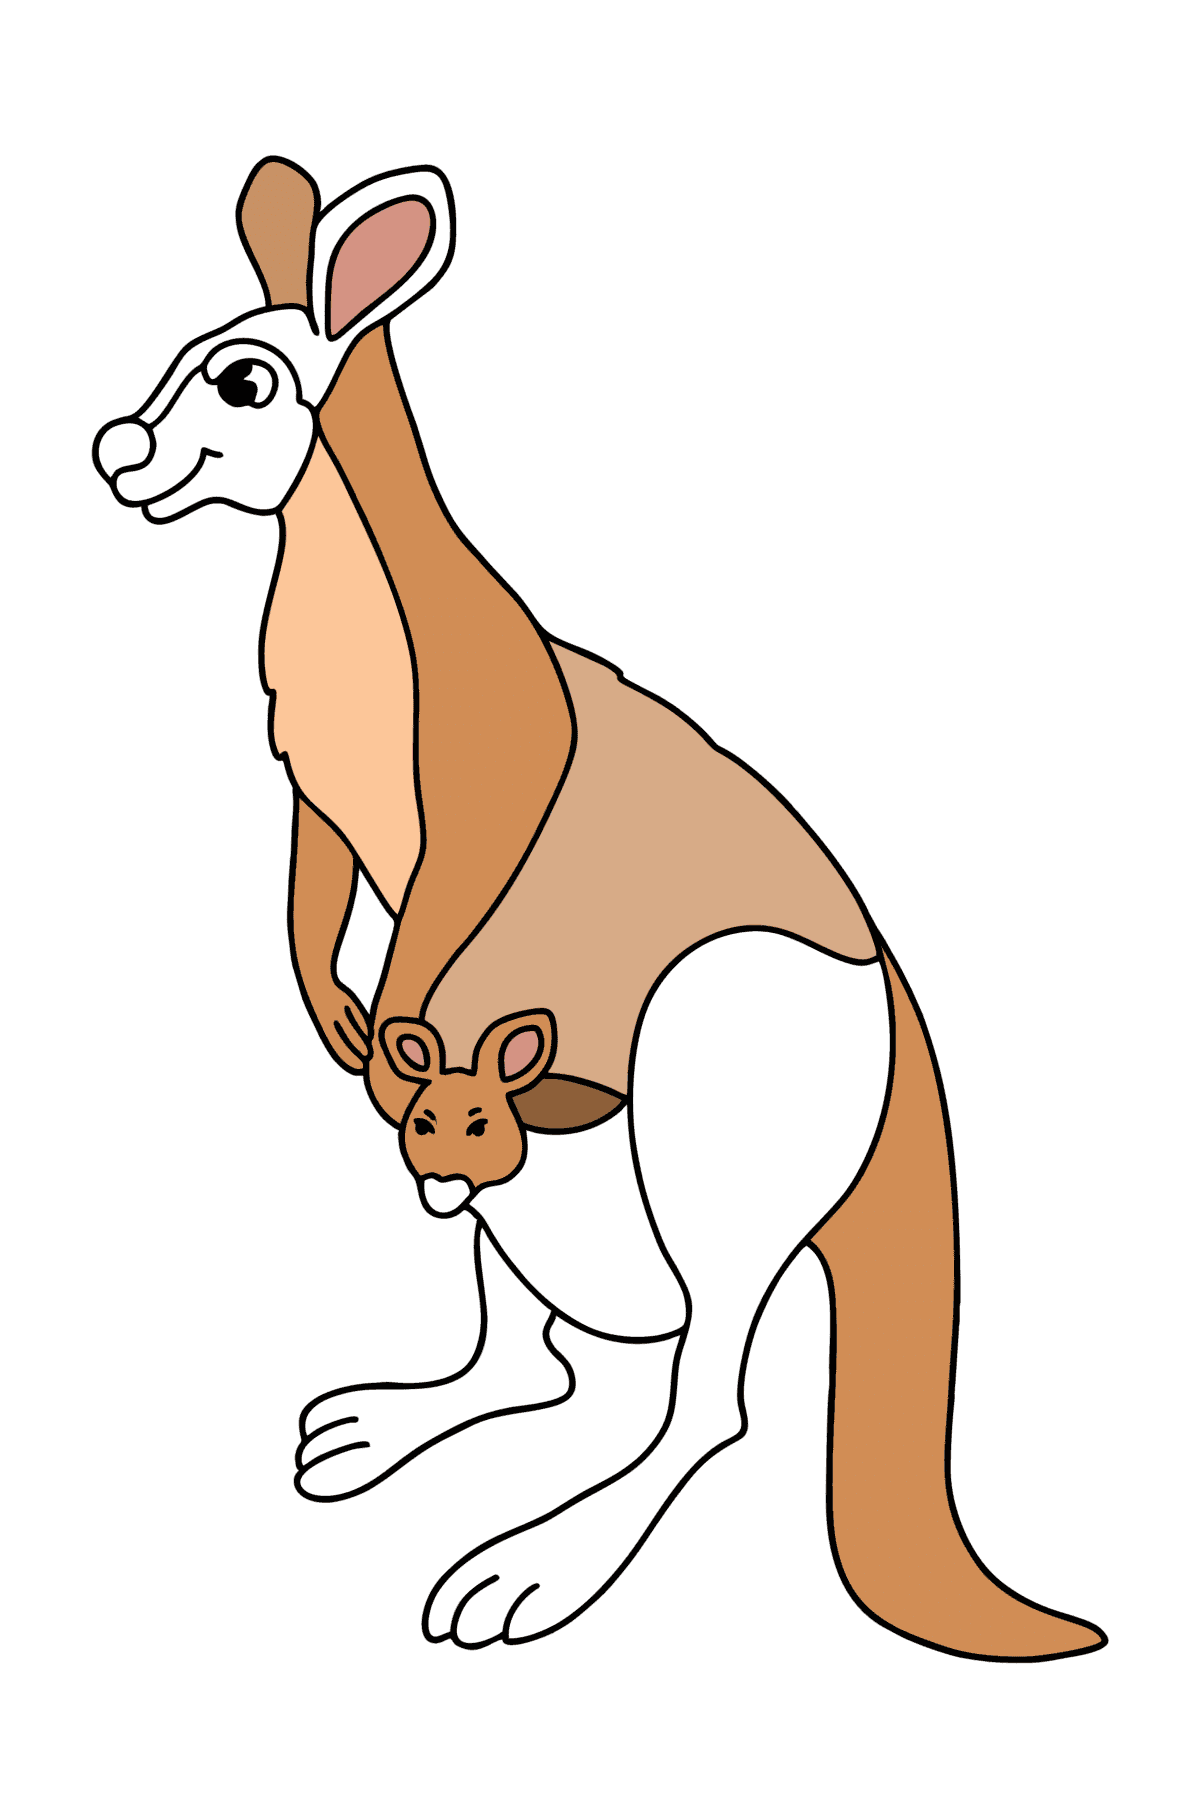 Red kangaroo сoloring page - Coloring Pages for Kids